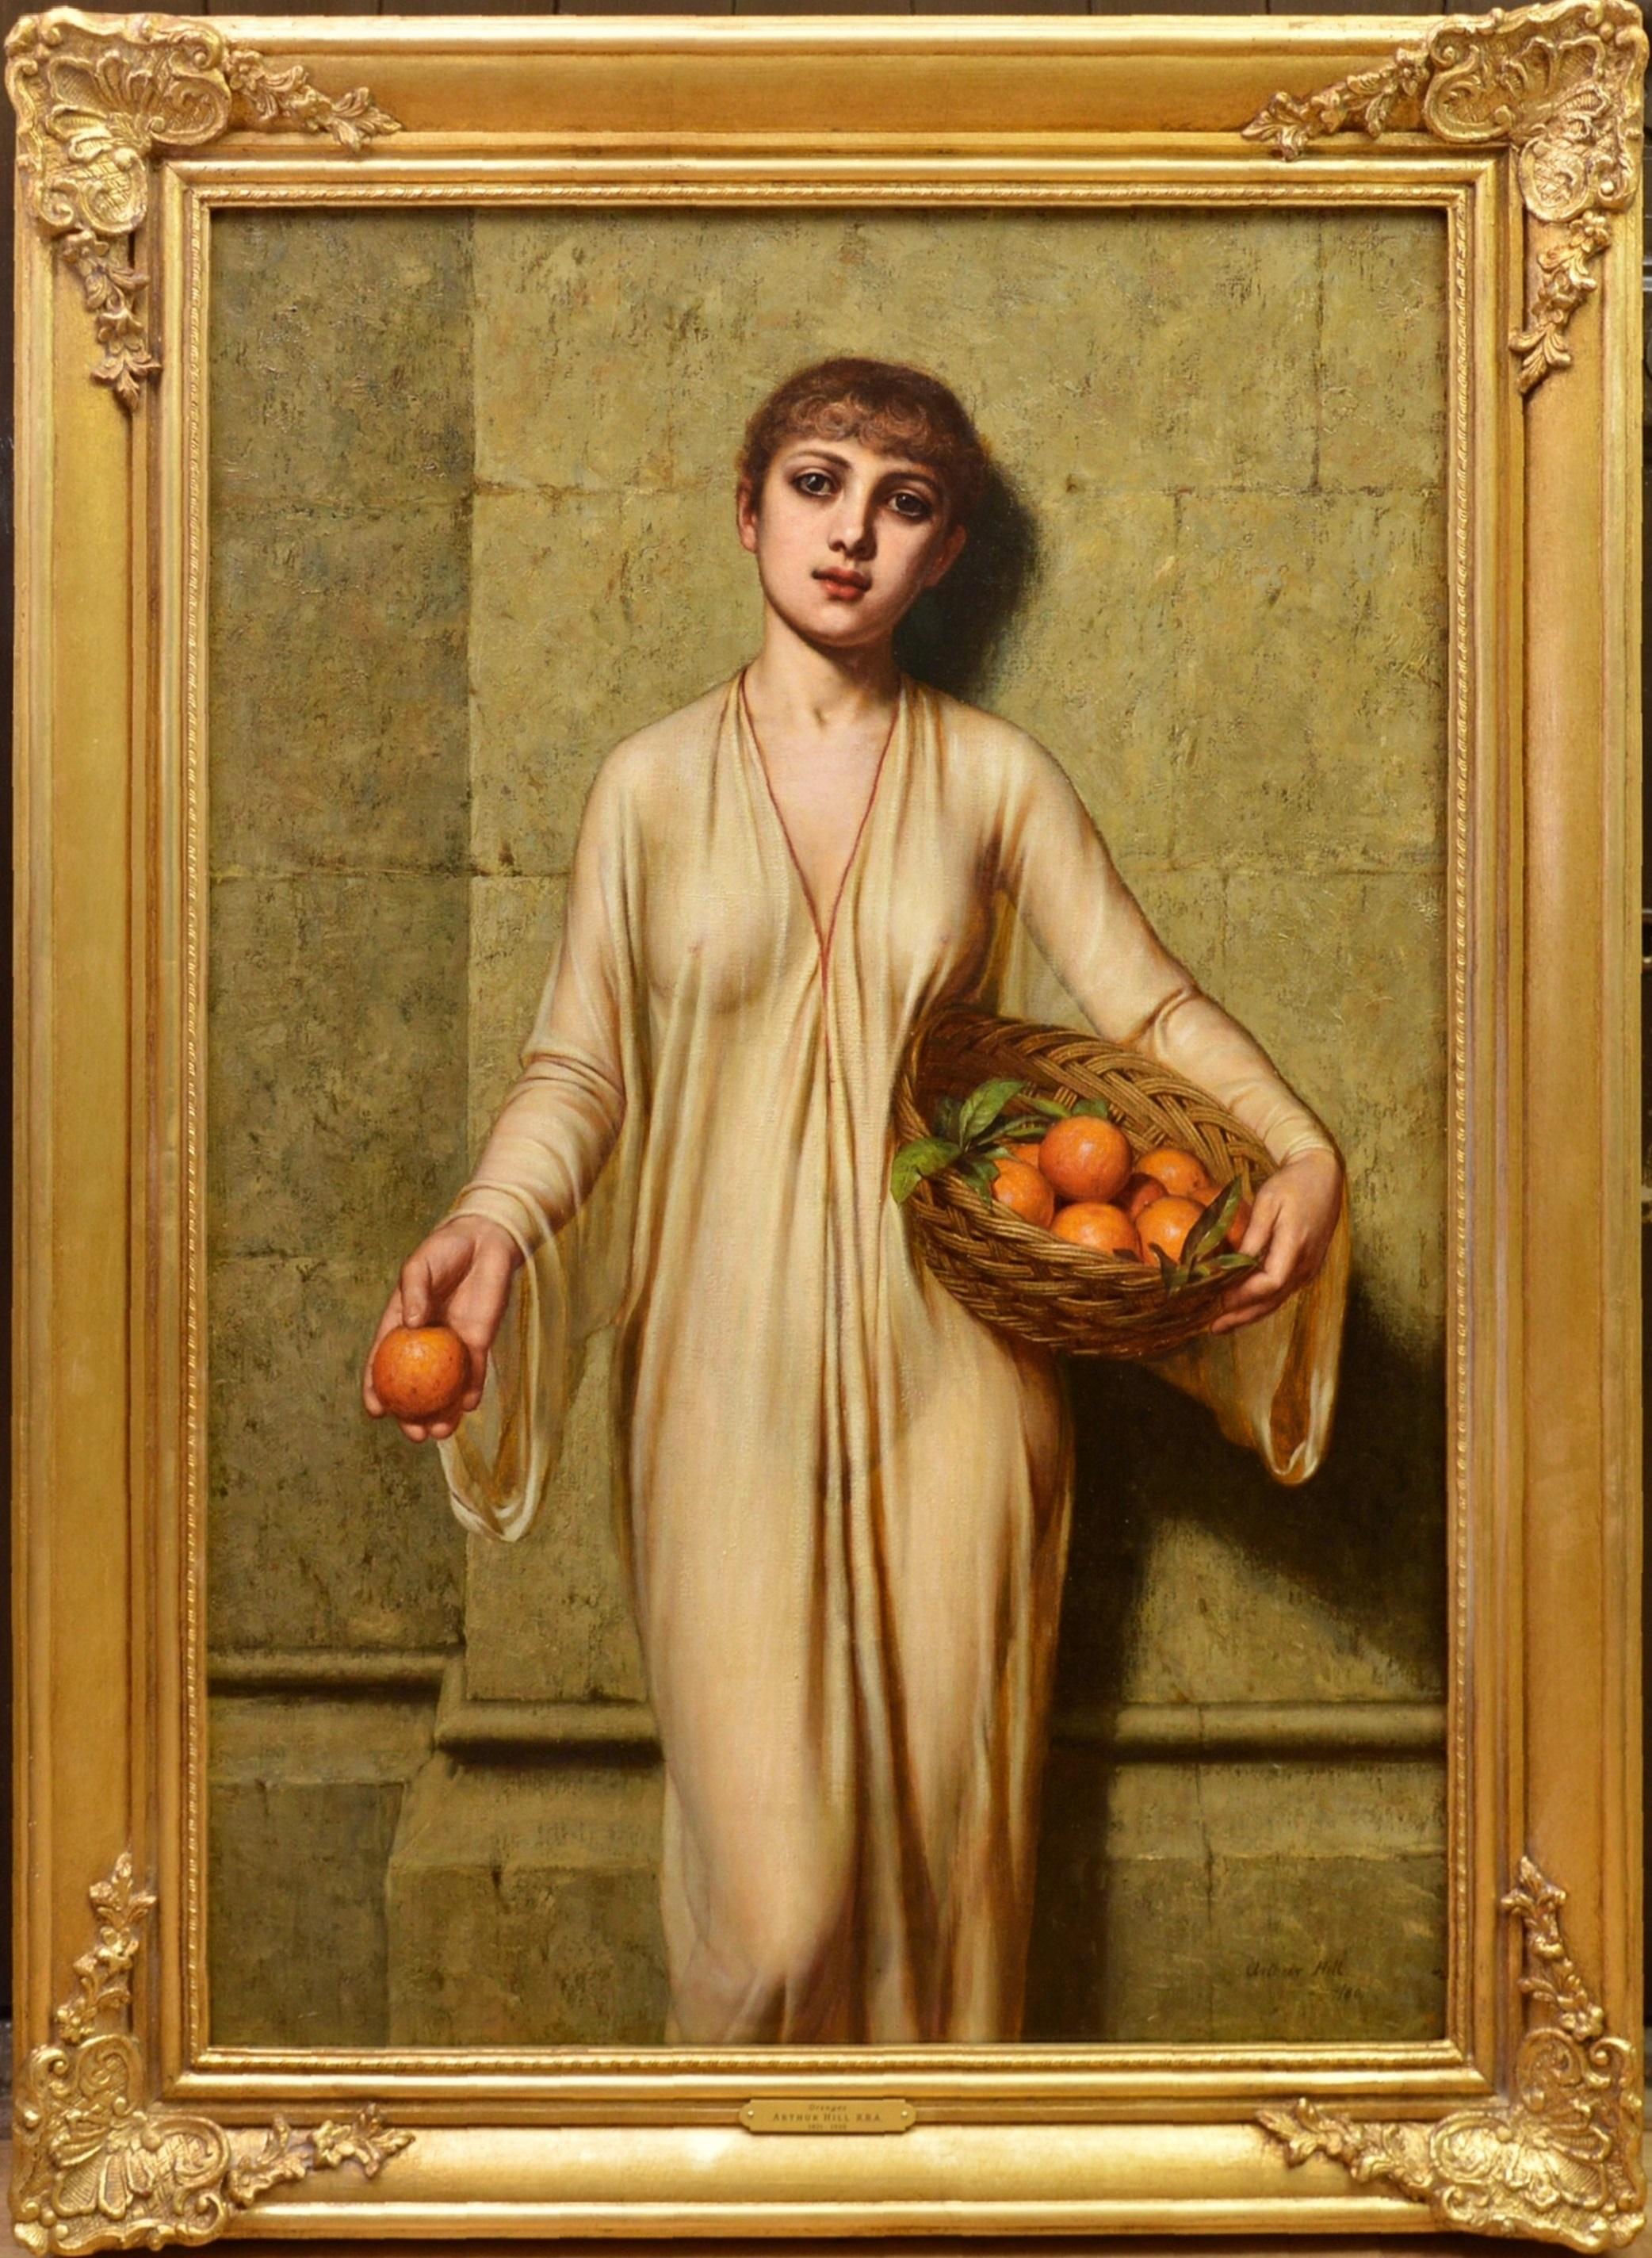 Arthur Hill Figurative Painting – Oranges - 19th Century Neoclassical Portrait Oil Painting of Young Roman Girl